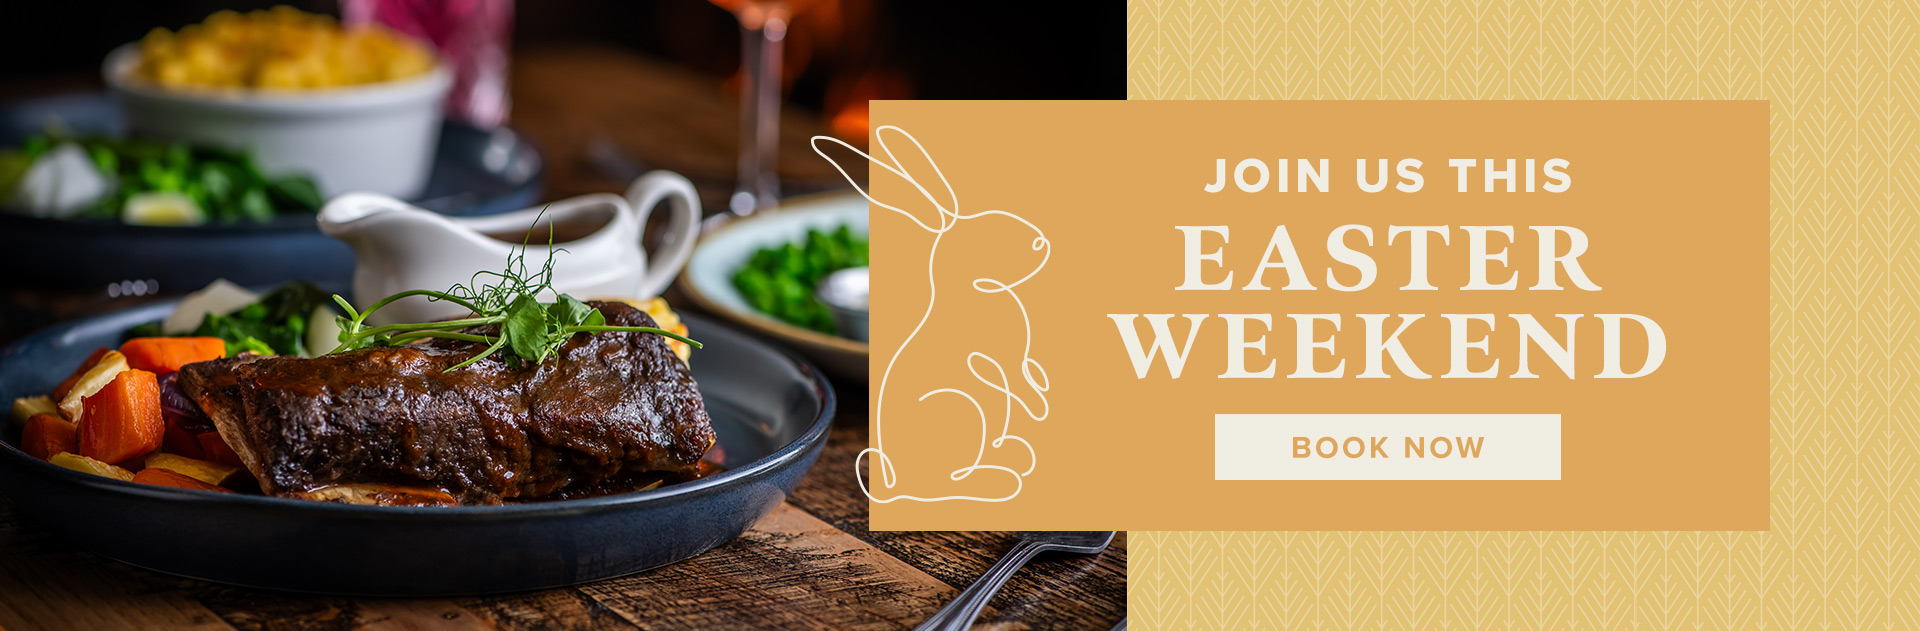 Easter at The Foley Arms in Stourbridge